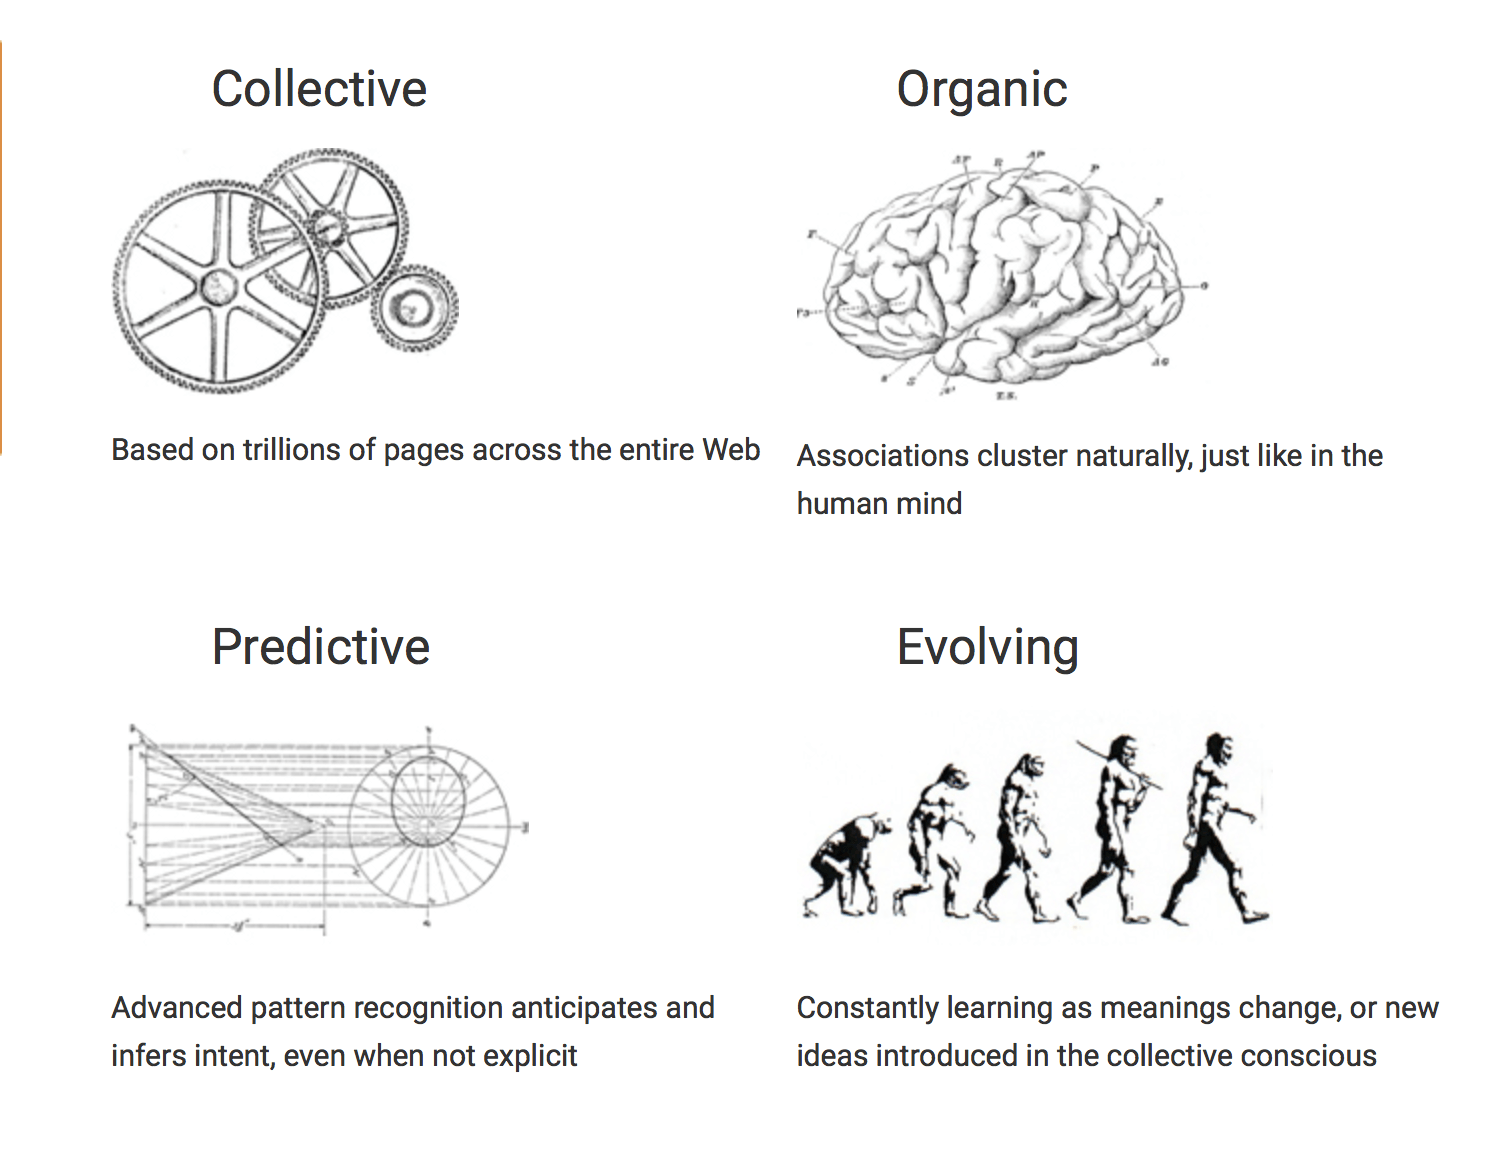 NetSeer is collective, organic, predictive, and evolving.